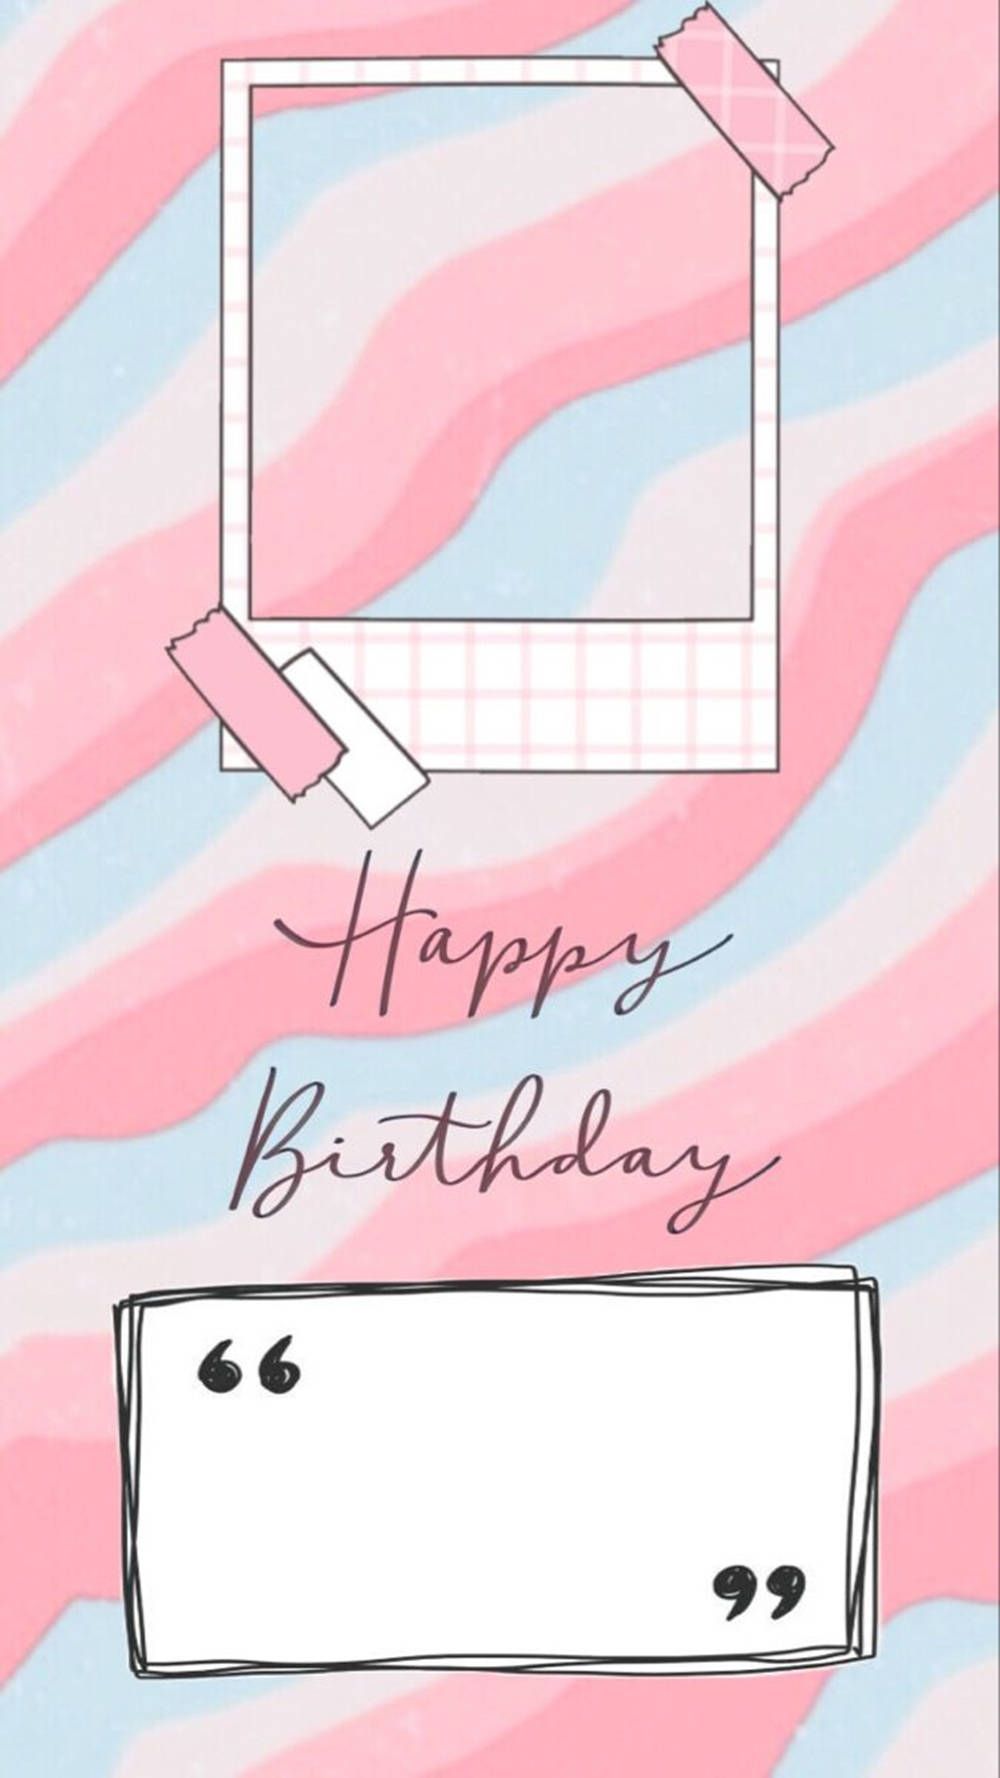 A happy birthday card with pink and blue stripes - Birthday